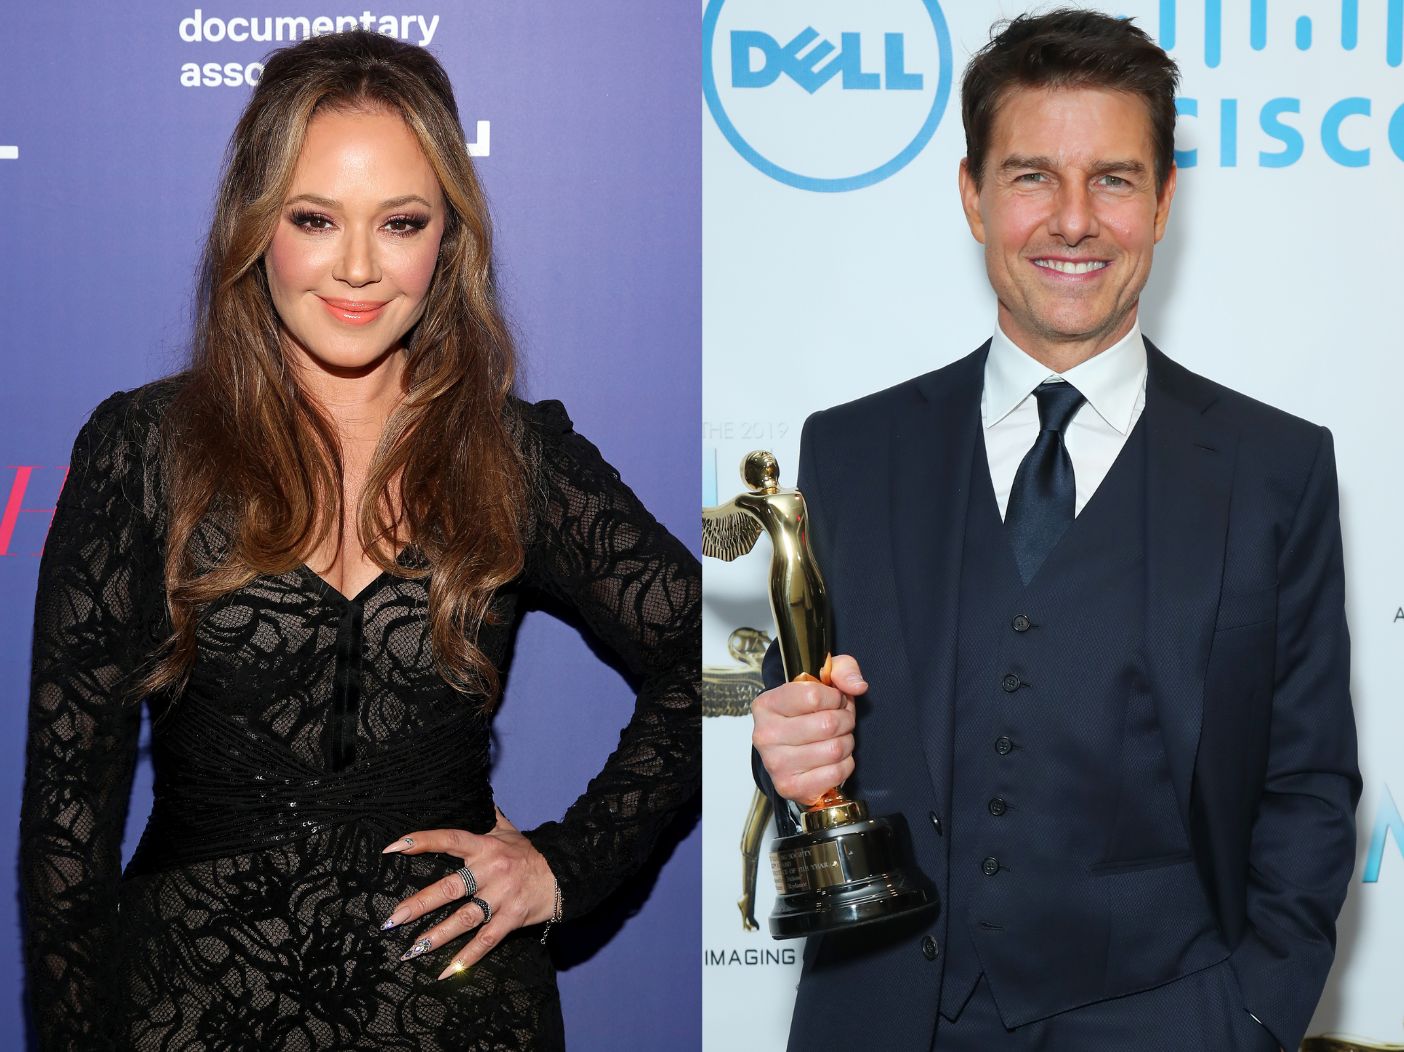 Leah Remini Implies Tom Cruise Is Guilty Of ‘Crimes Against Humanity’